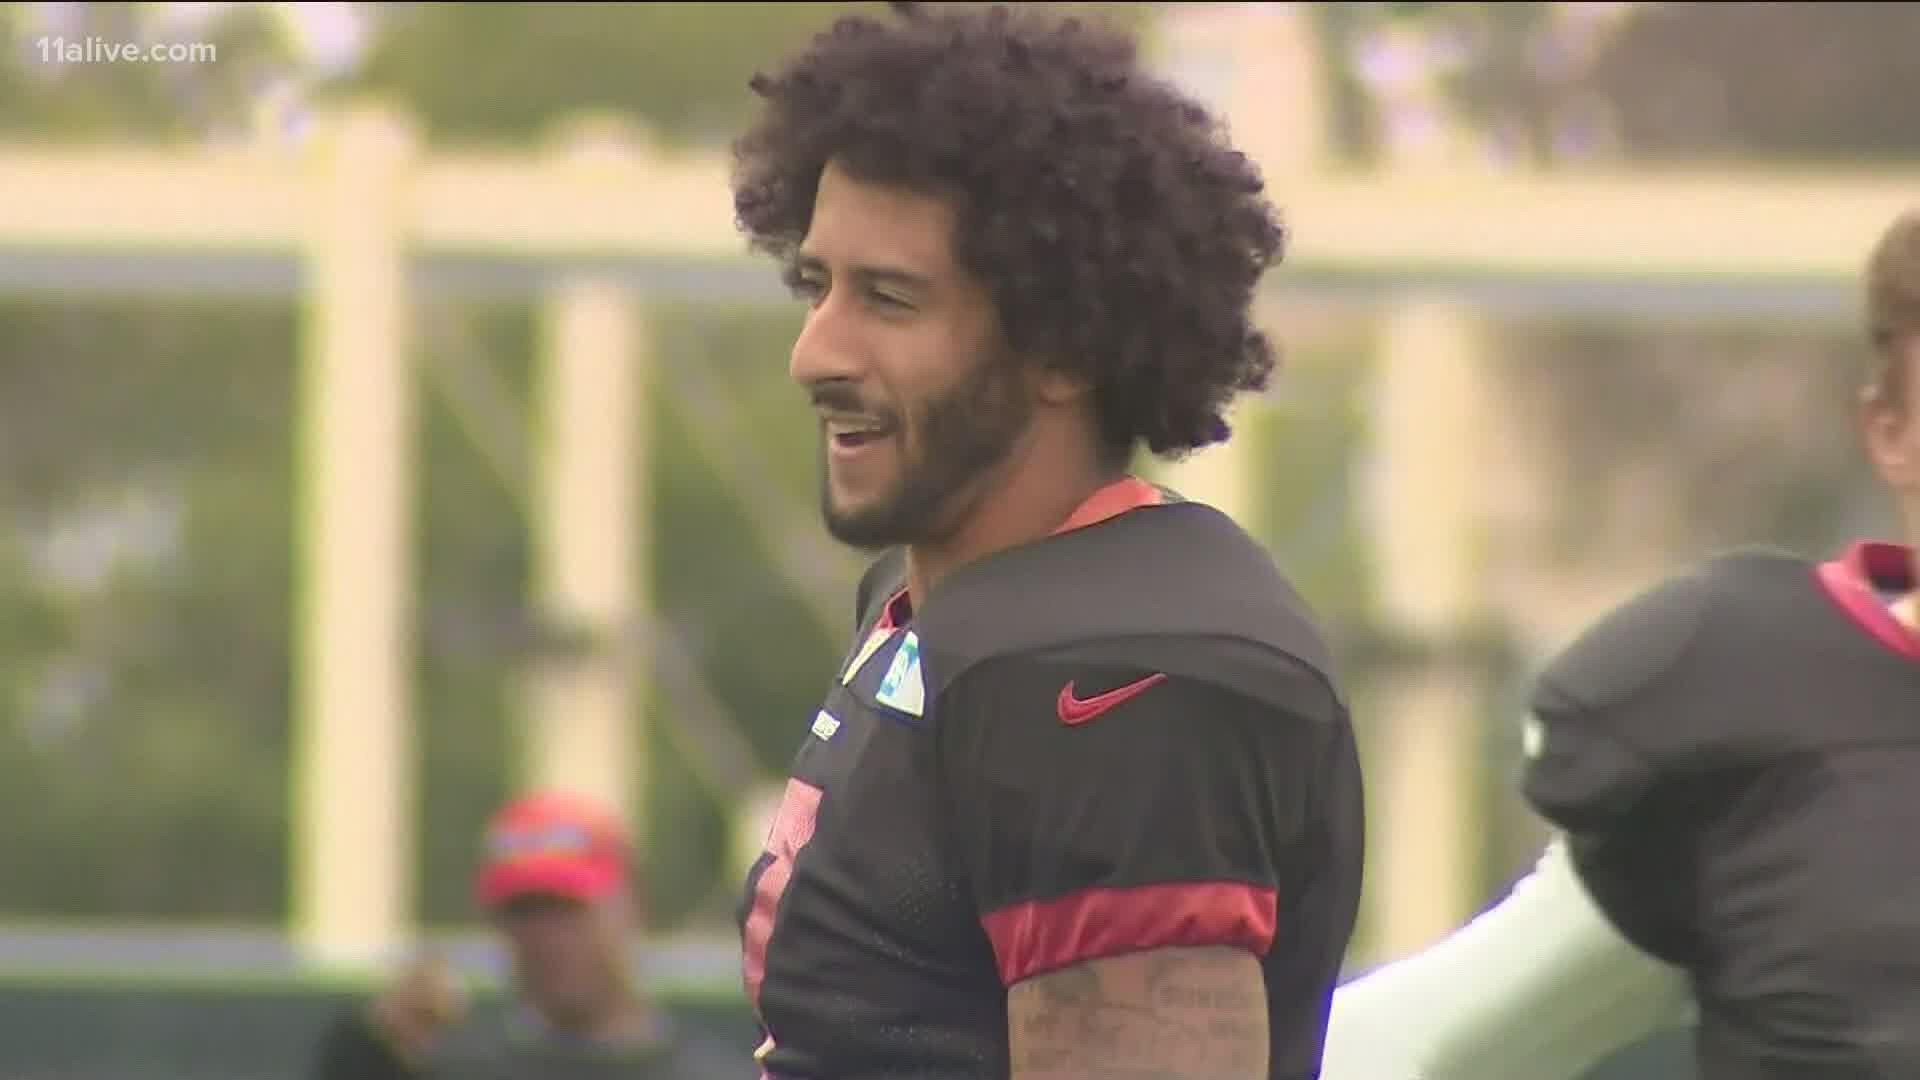 Colin Kaepernick said the Netflix series will explore the racial conflicts he faced during high school as an adopted Black man in a white community.